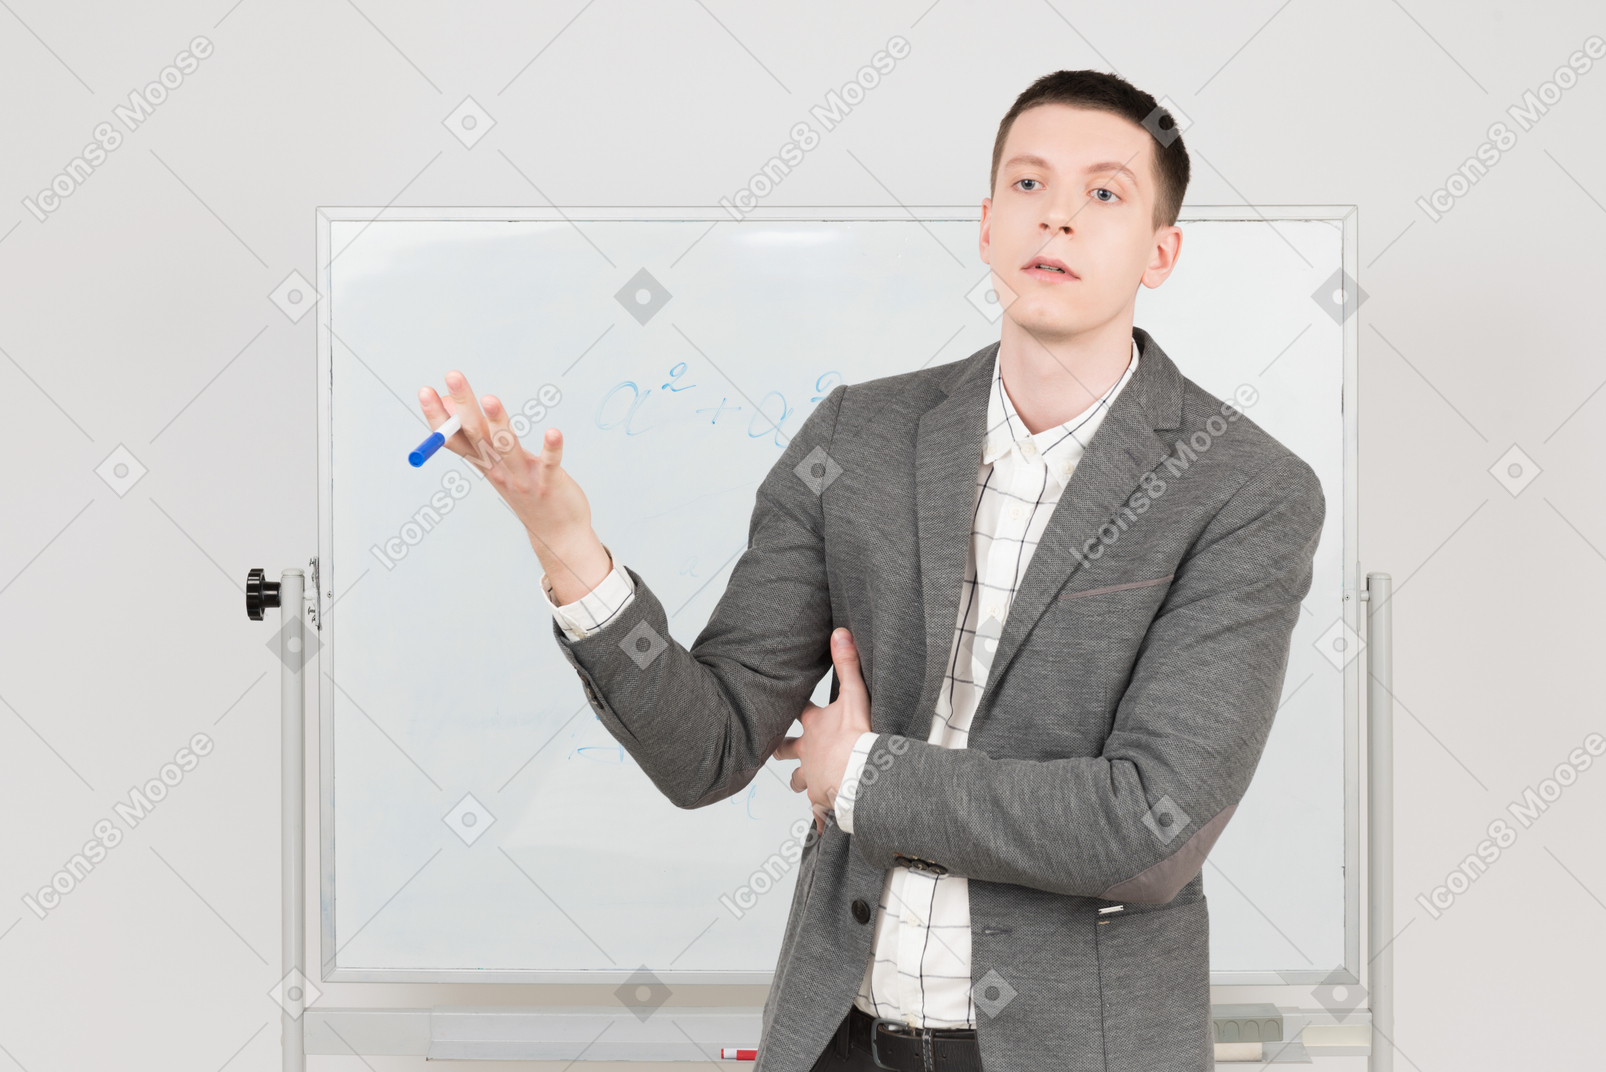 Teacher trying his best to explain the subject